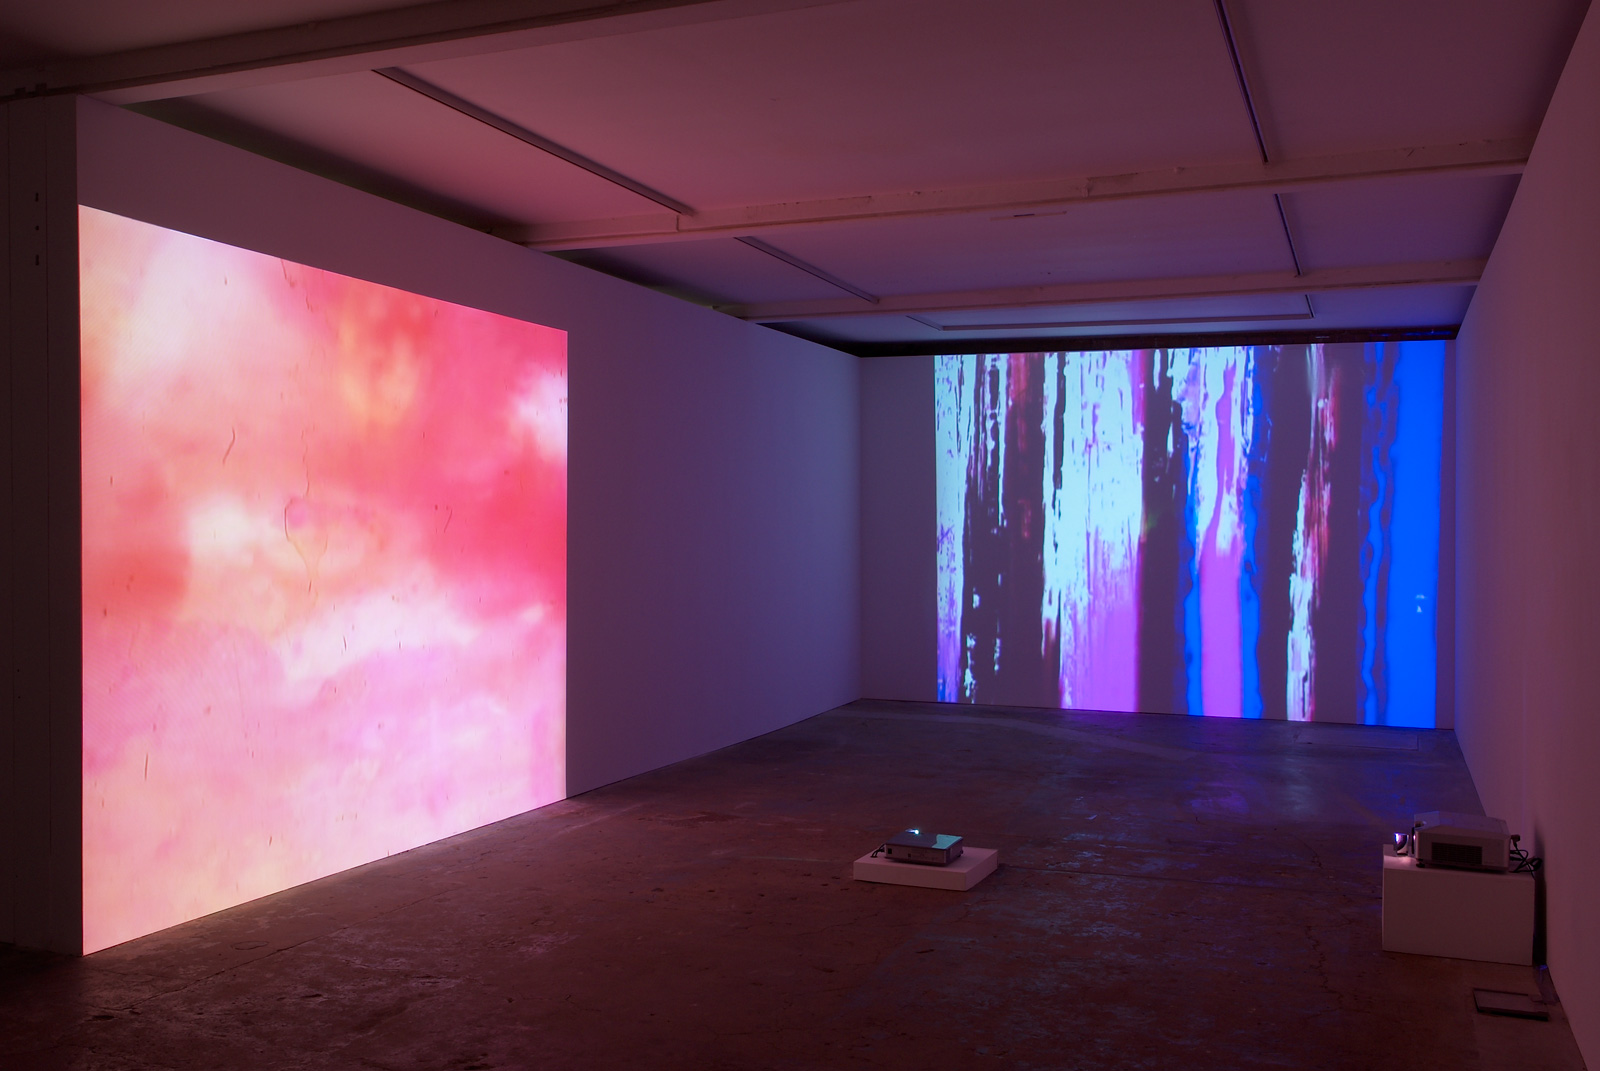 Installation view. Electric Kool-Aid and Mezcal Worm
, Jennifer West